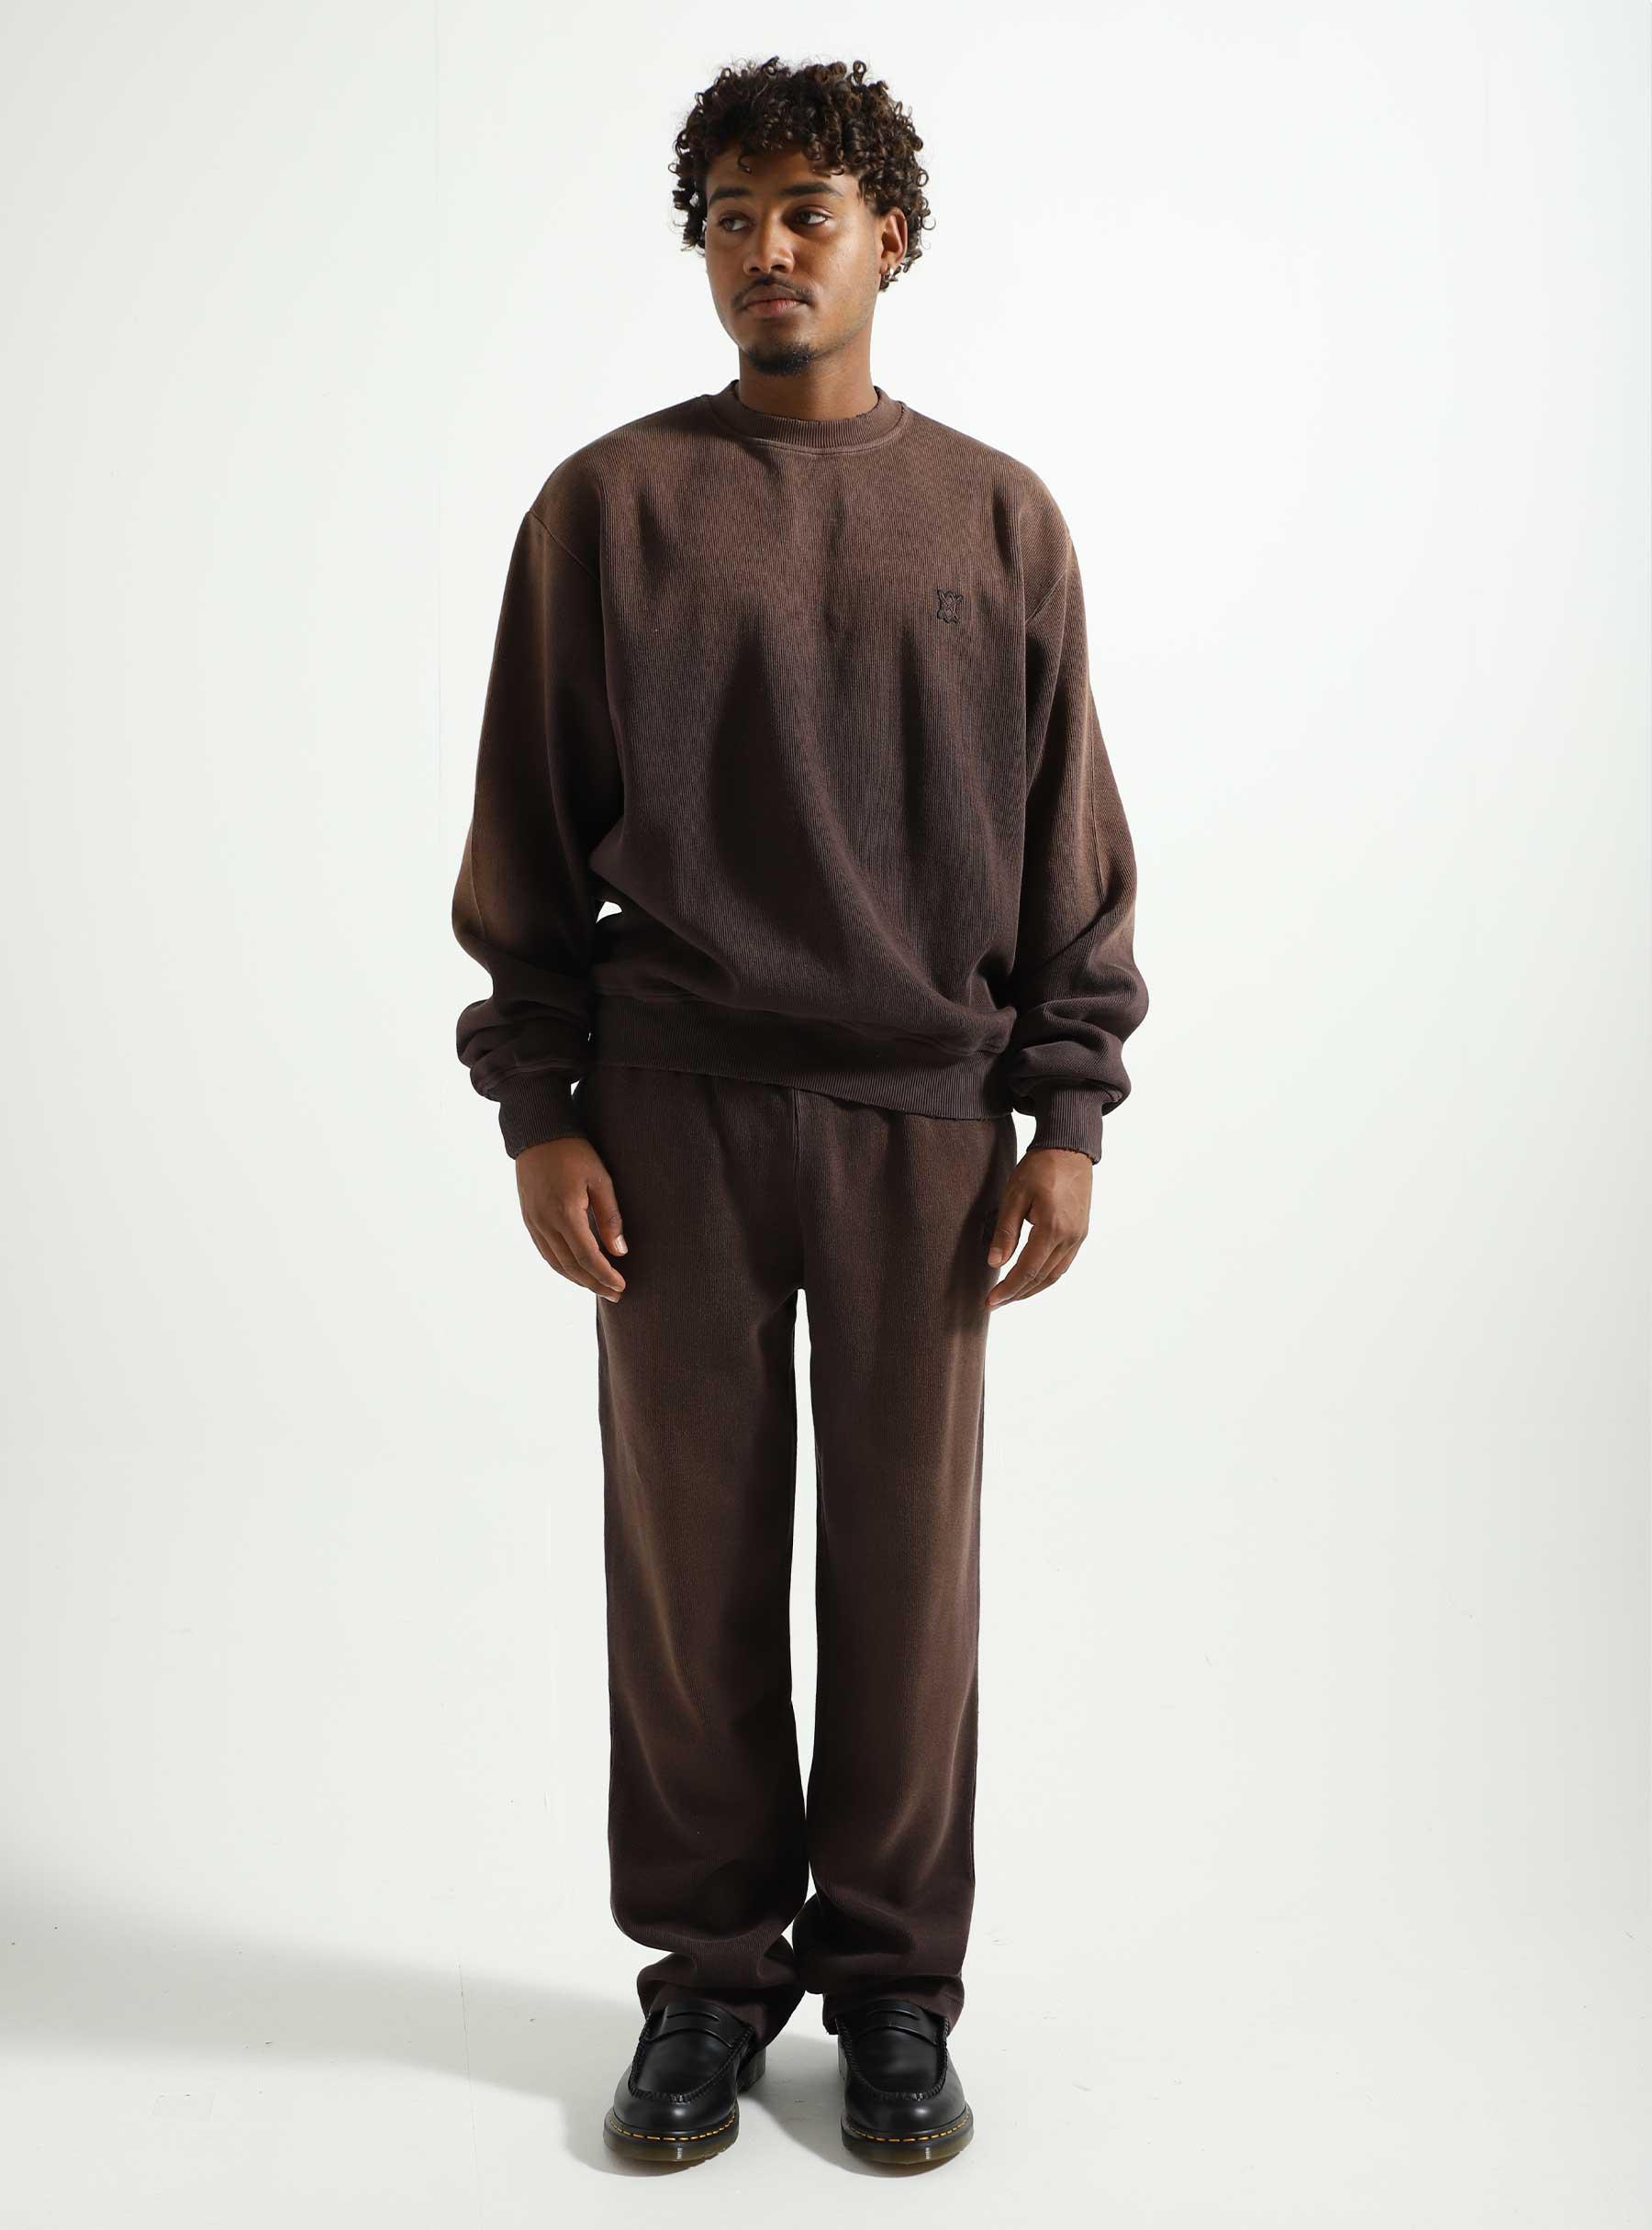 Rodell Sweater Syrup Brown 2321038